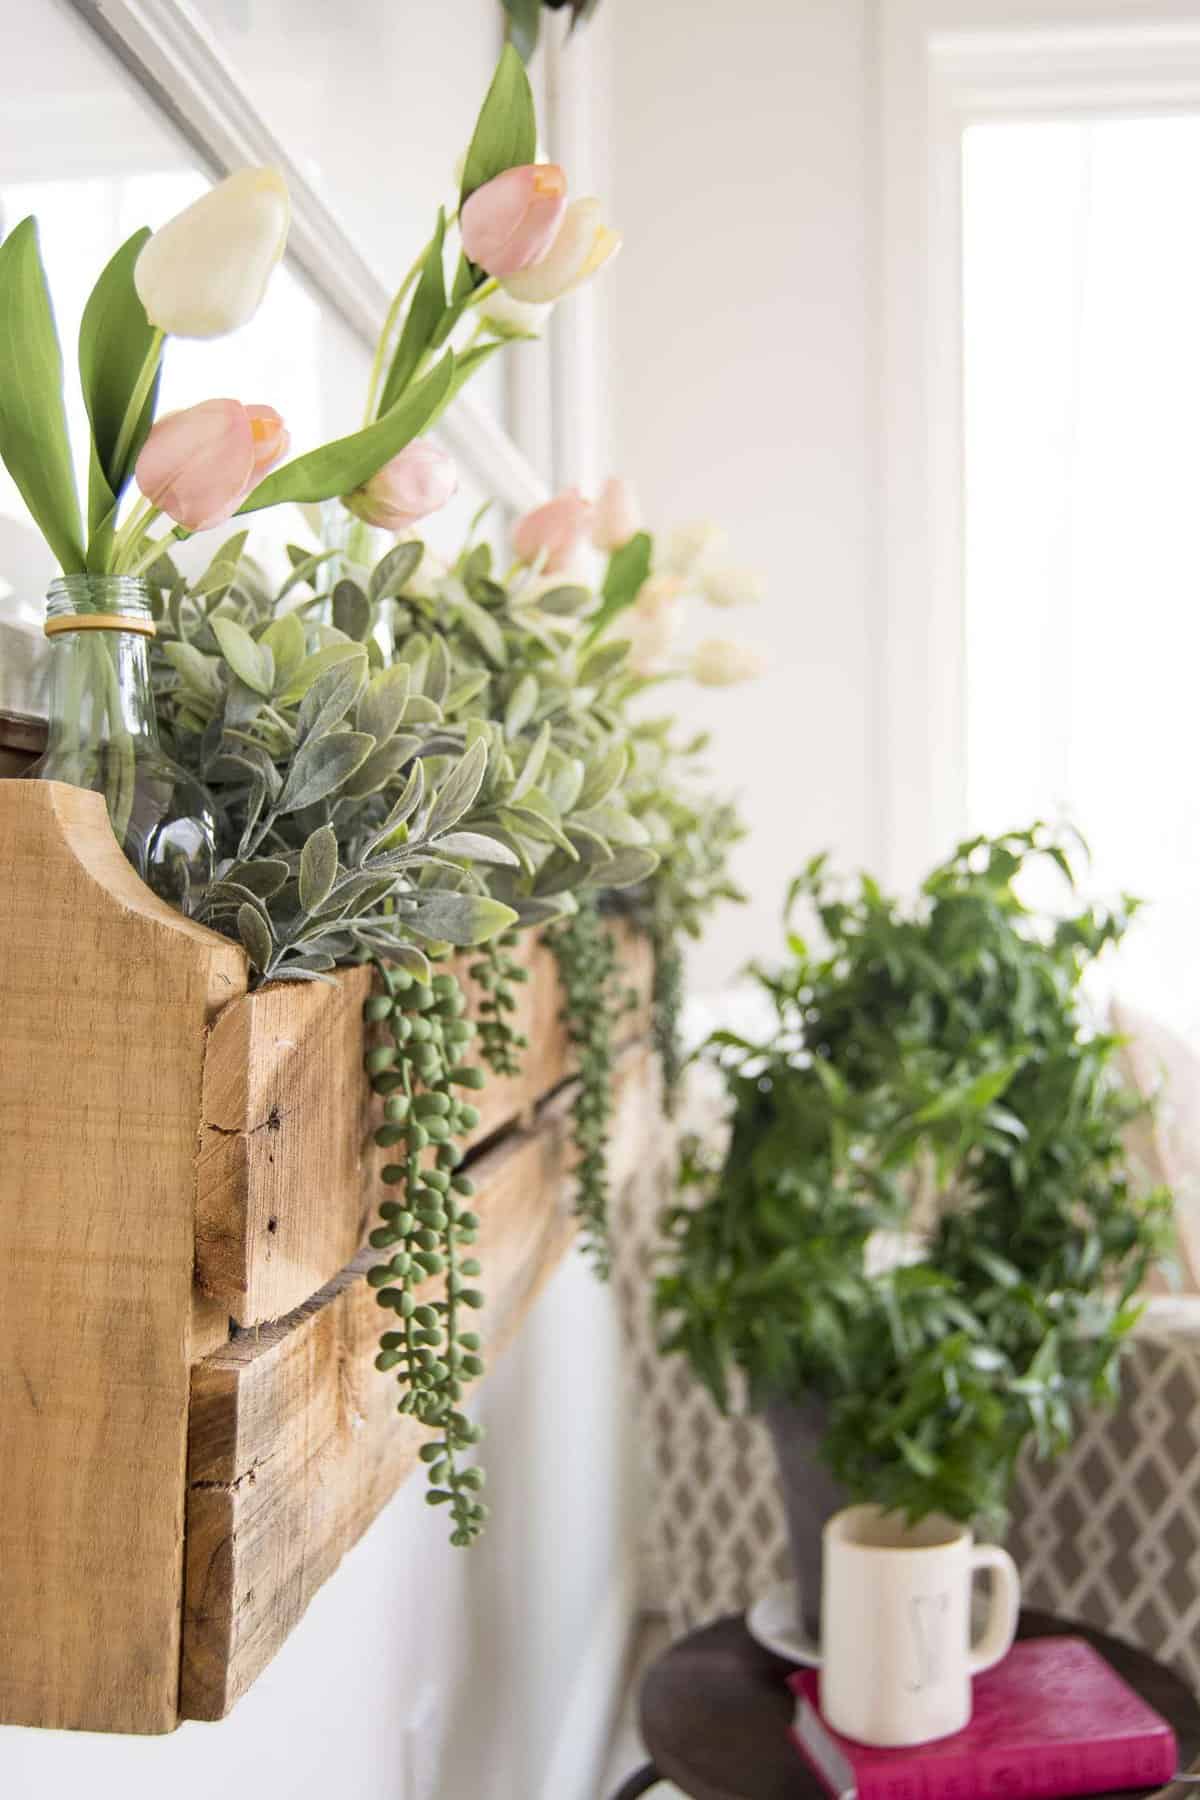 Are you looking for an easy way to bring the outdoors in without any fuss? Today I'm sharing my indoor faux window box idea for how to create an outdoor space right inside your home. No dirt. No watering. No sun needed.